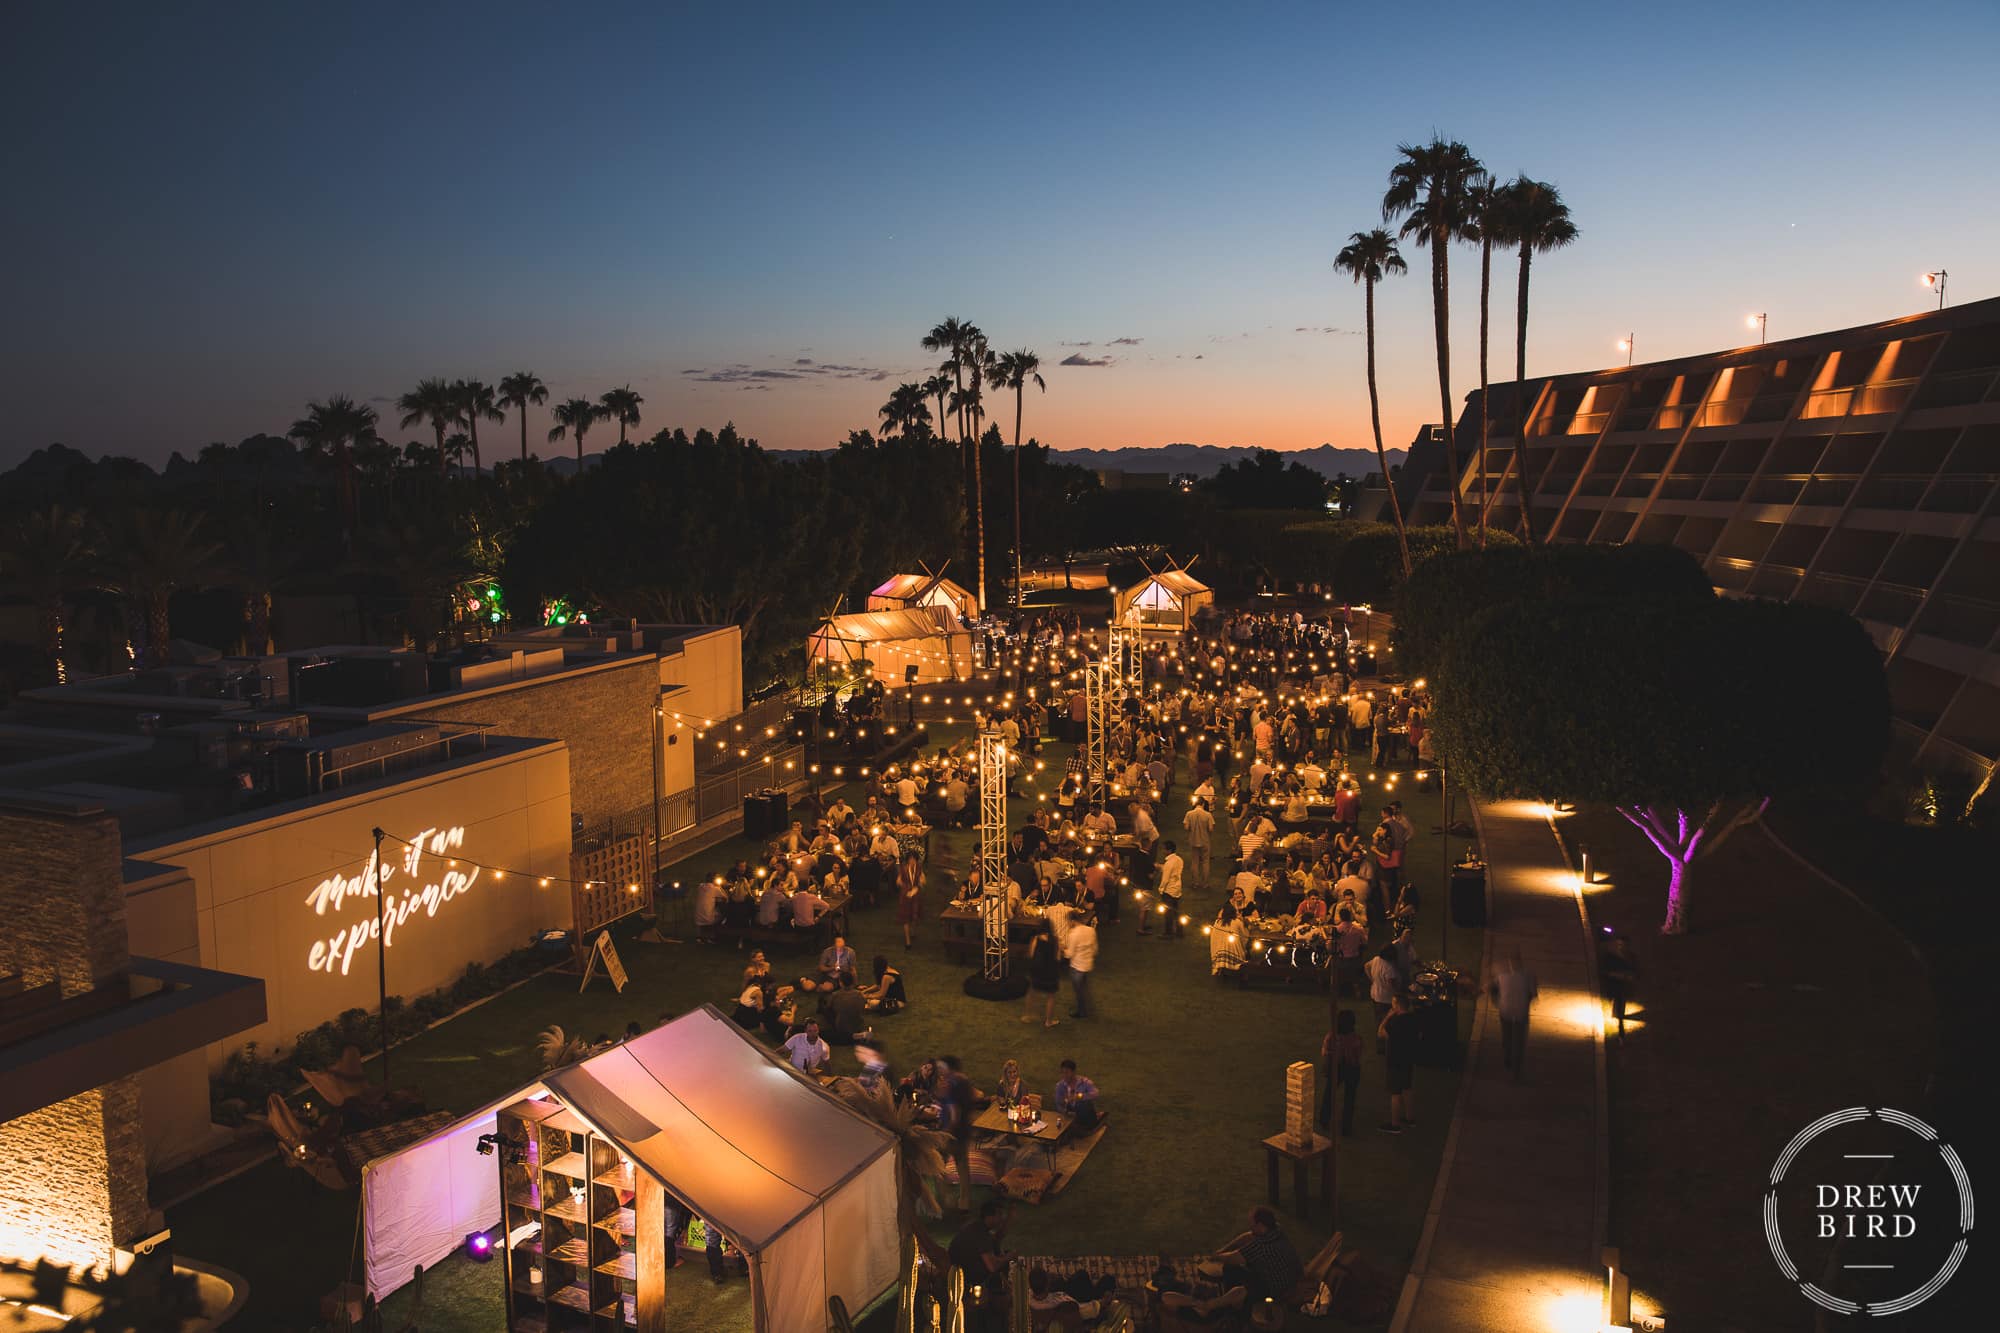 Corporate event at luxury resort Phoenician in Scottsdale, Arizona. Sunset and a big party with palm trees in distance.